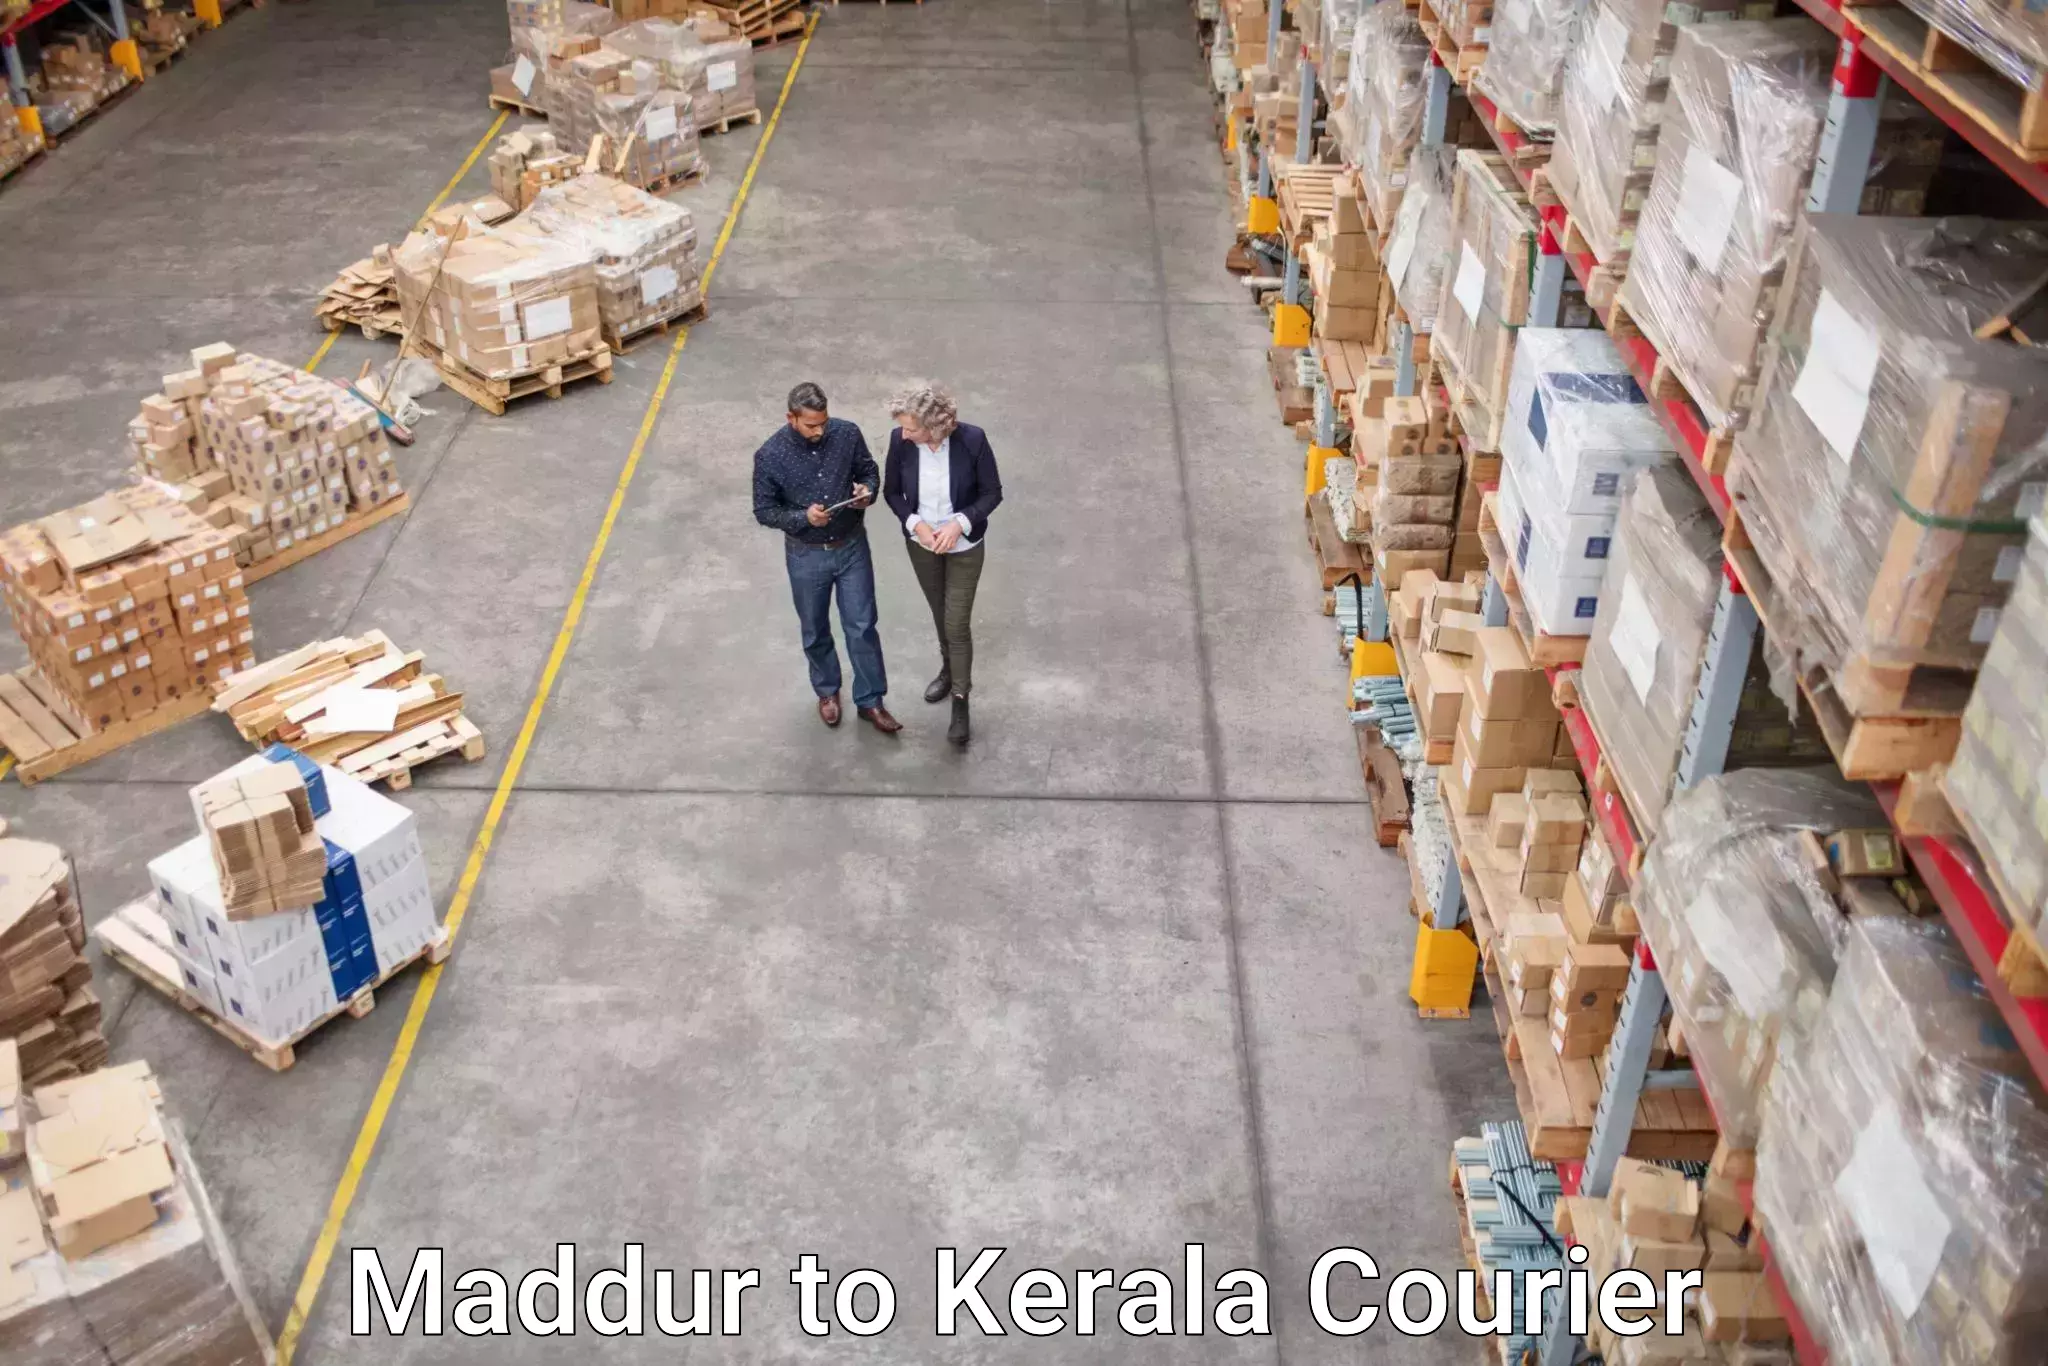 Automated parcel services Maddur to Payyanur